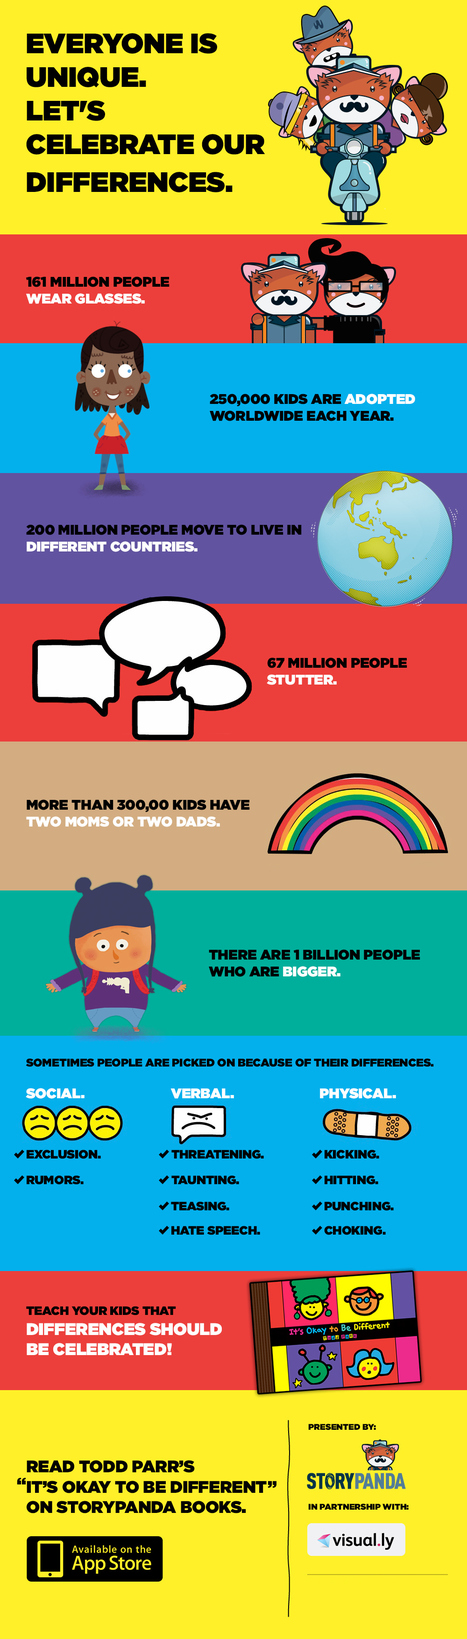 A Must-See Anti-Bullying Poster Perfect For Classrooms | Latest Social Media News | Scoop.it